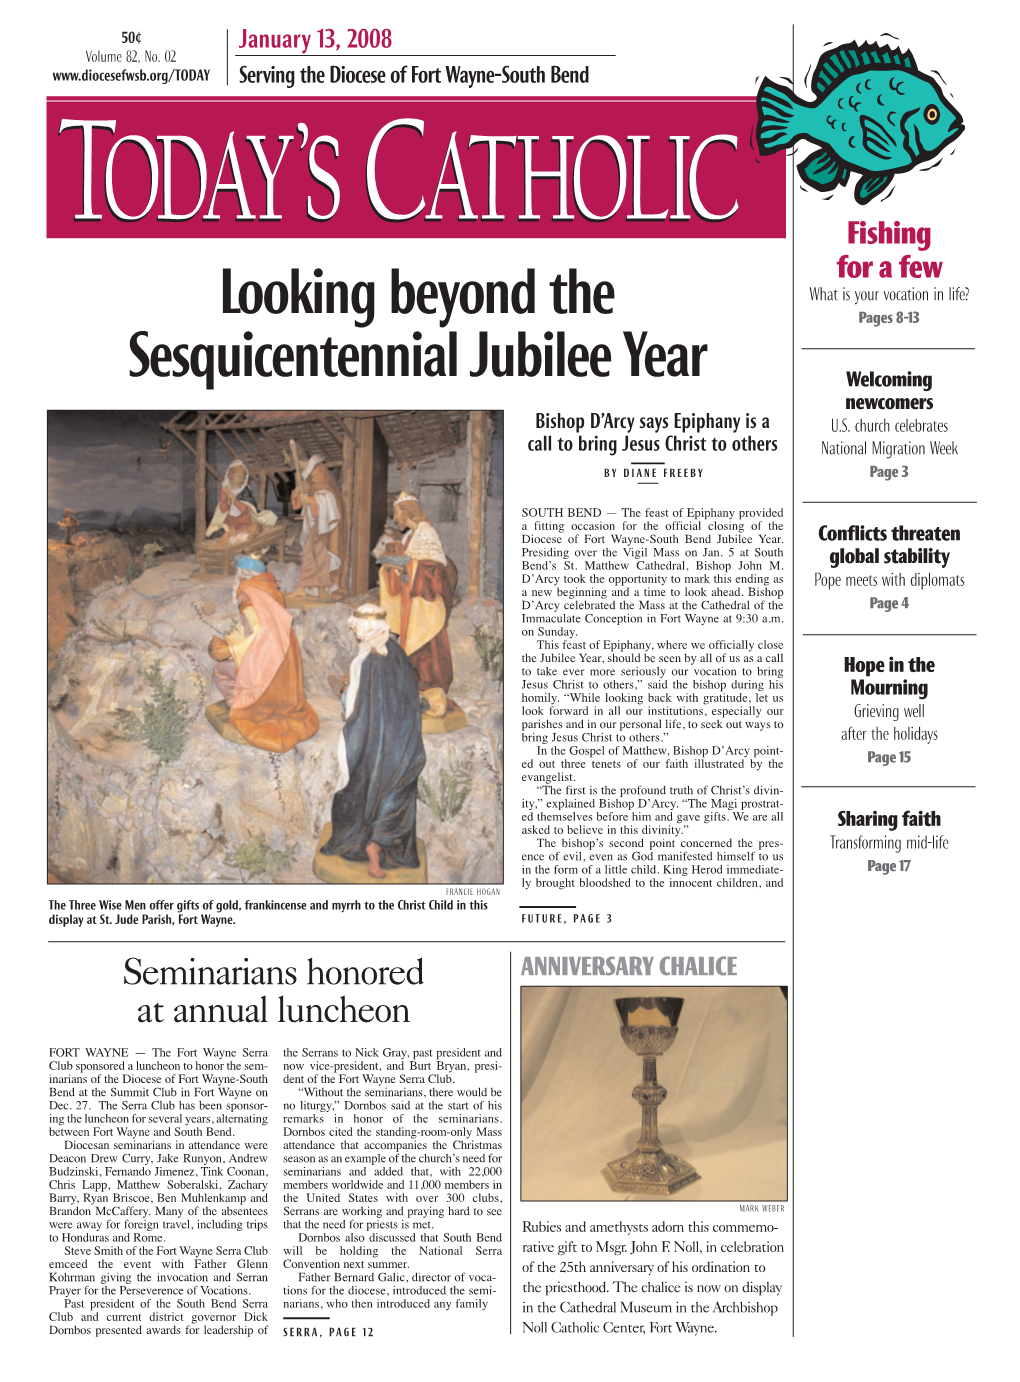 Looking Beyond the Sesquicentennial Jubilee Year